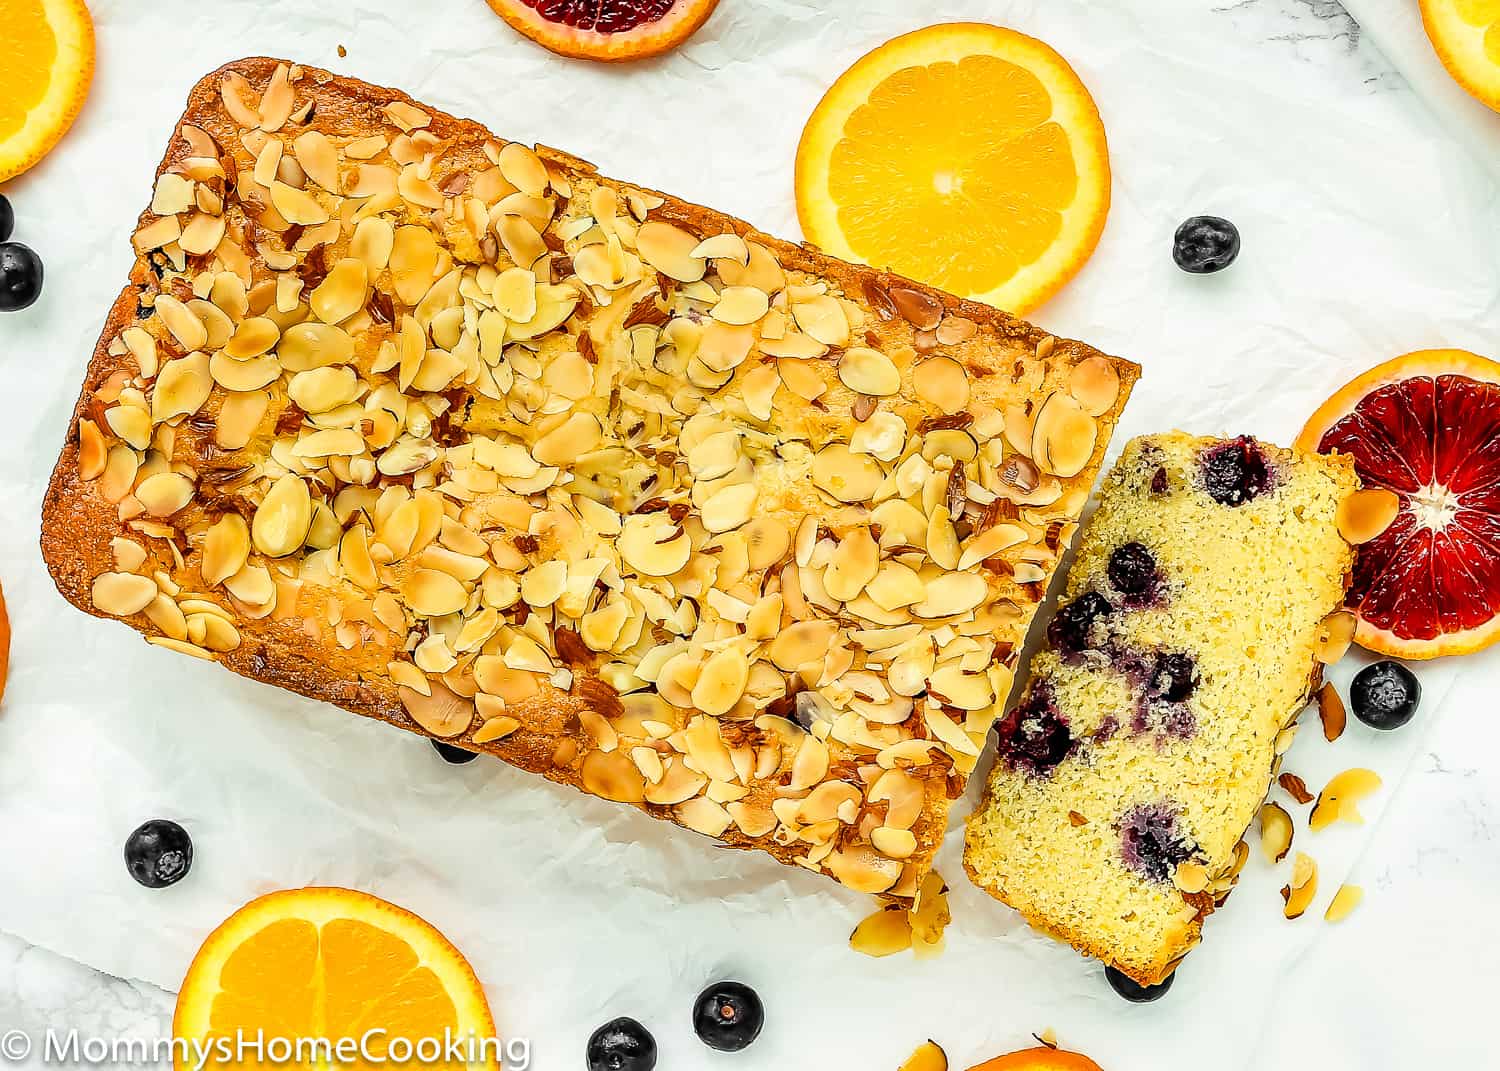 Eggless Blueberry Cornbread Loaf with toasted almonds on top.